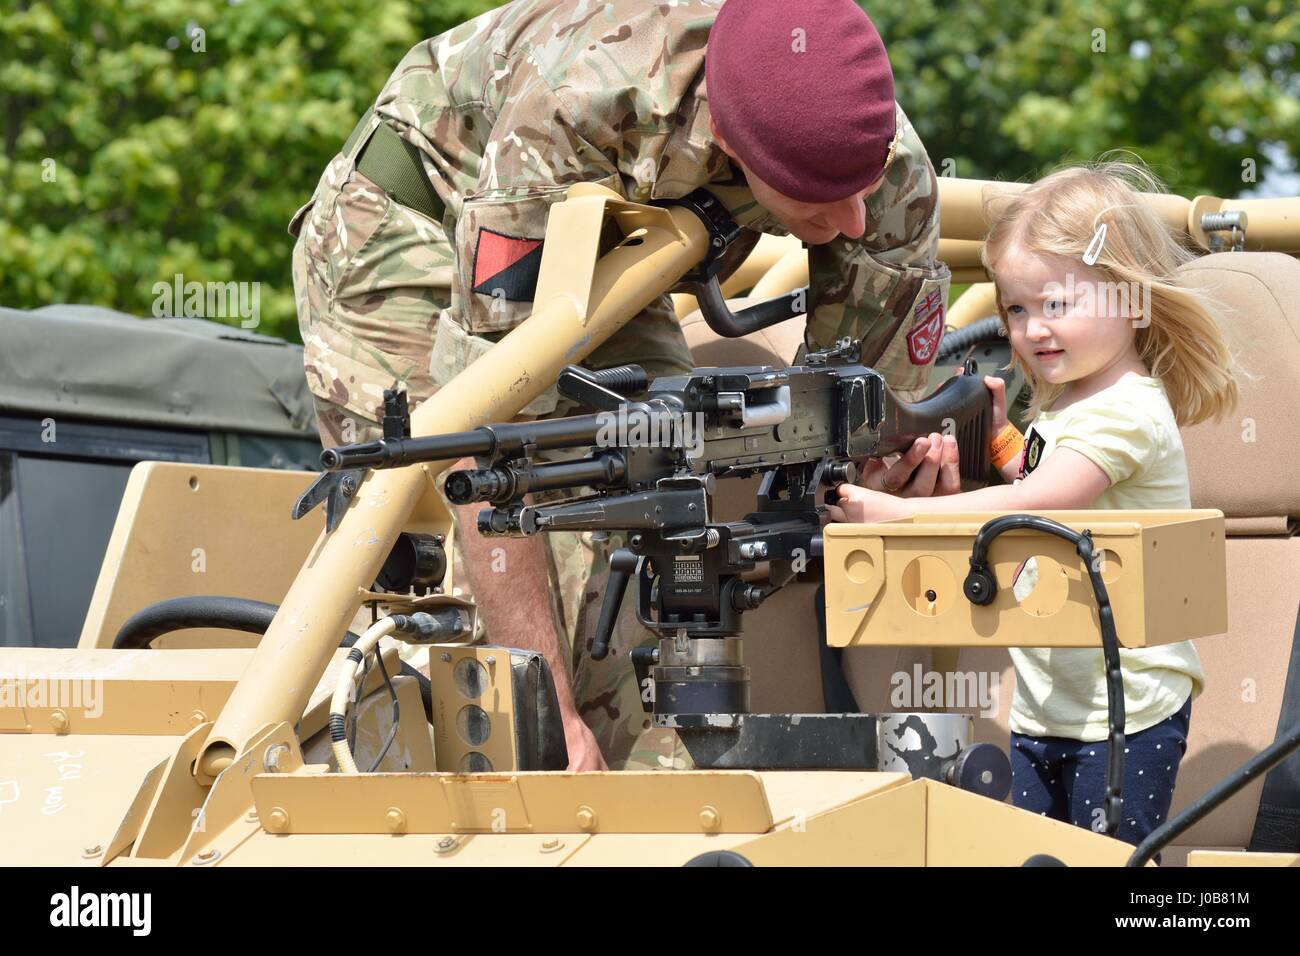 Military Tattoo  COLCHESTER ESSEX UK 8 July 2014:   Small Girl being shown gun by soldier Stock Photo